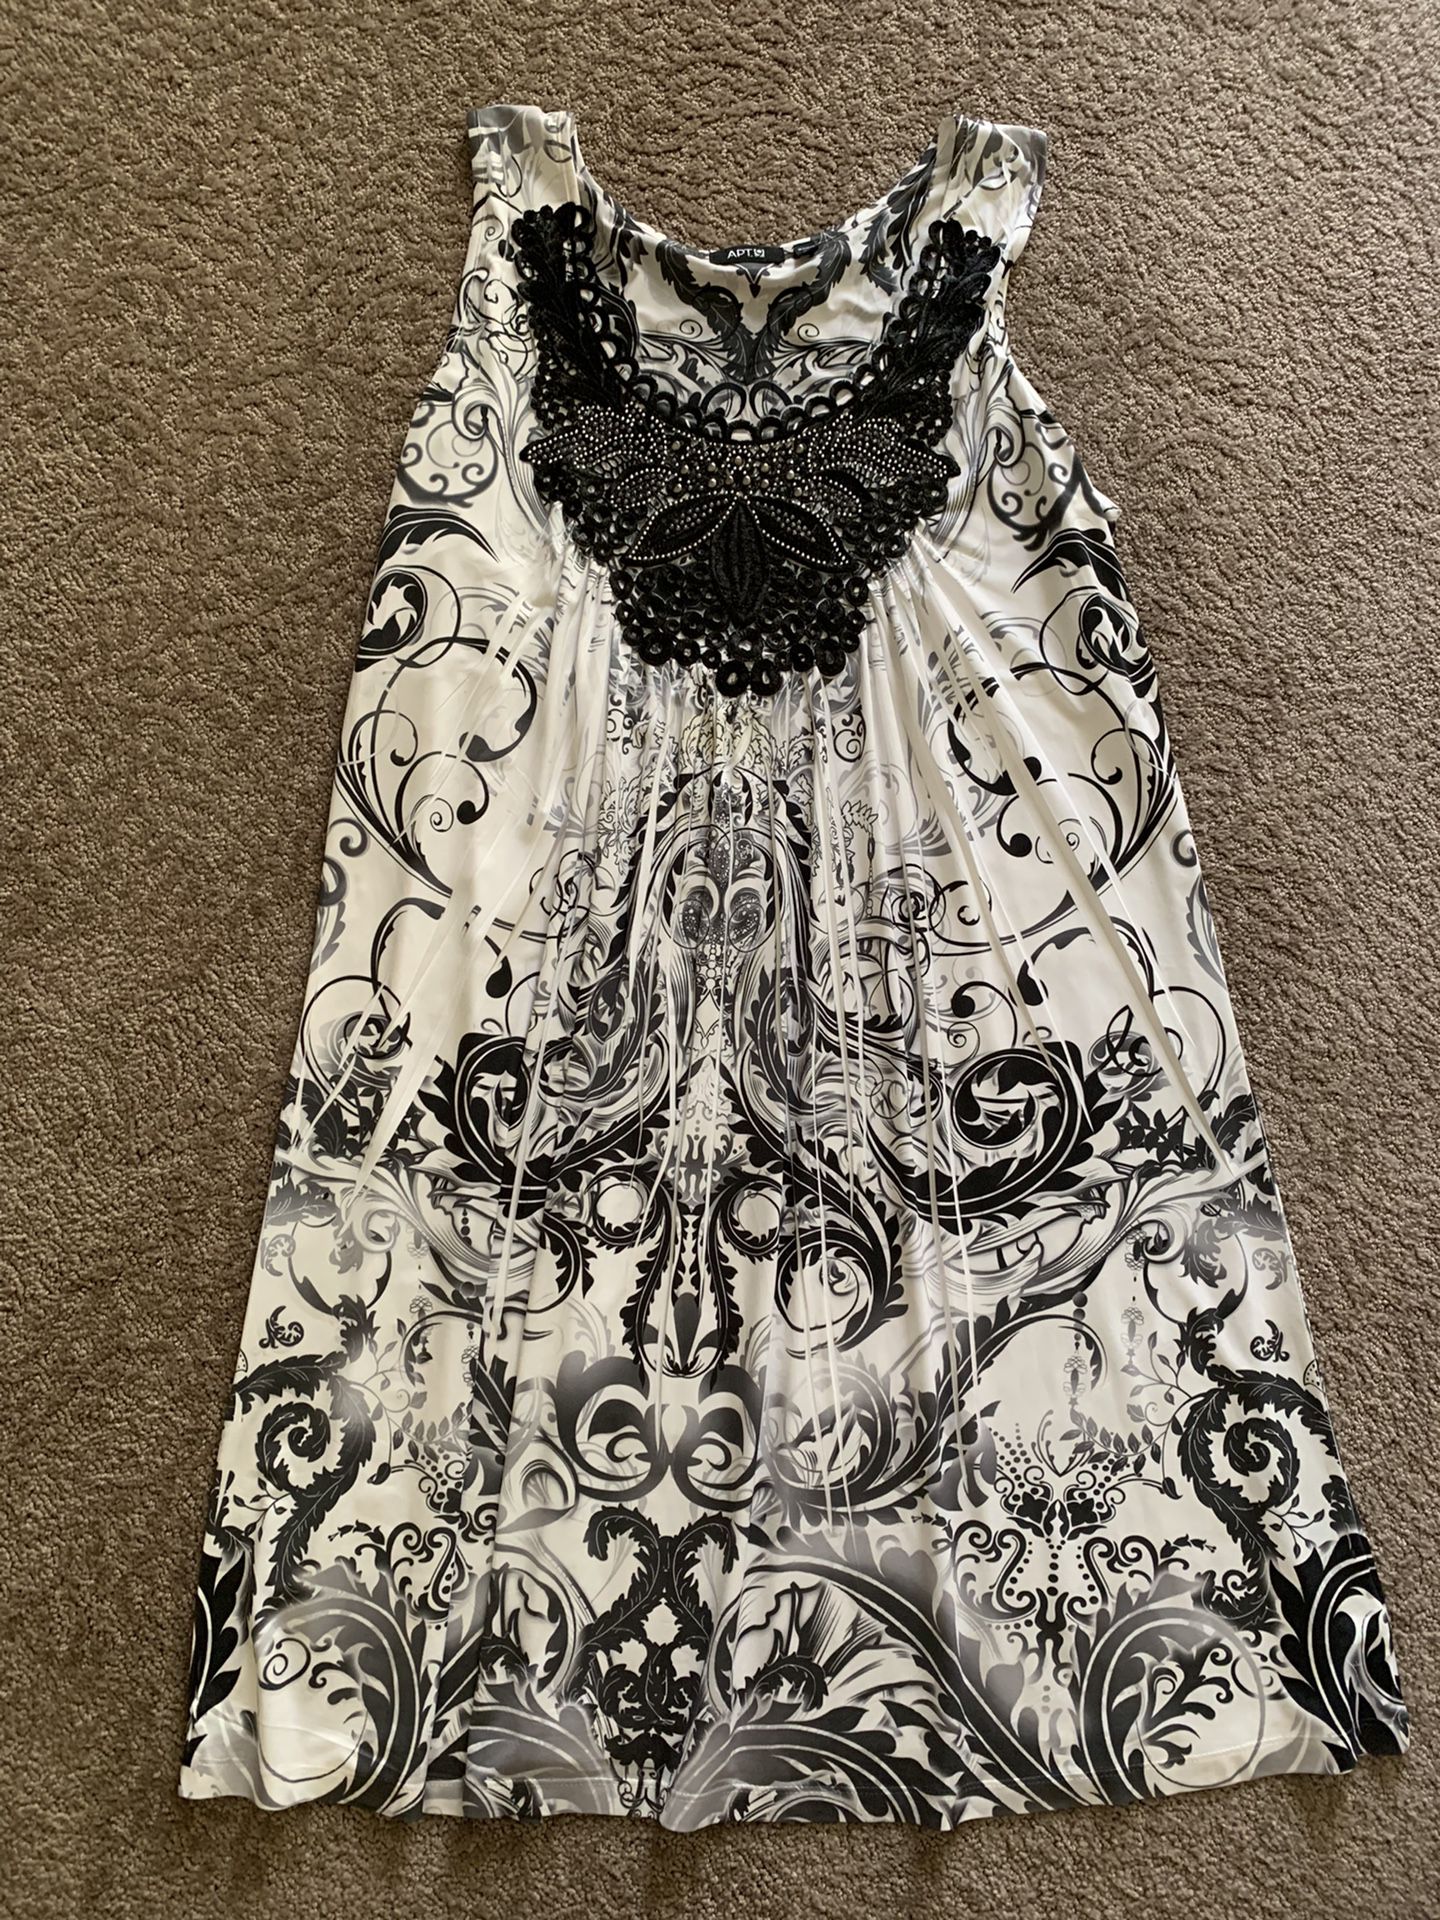 Black White And Silver Sundress